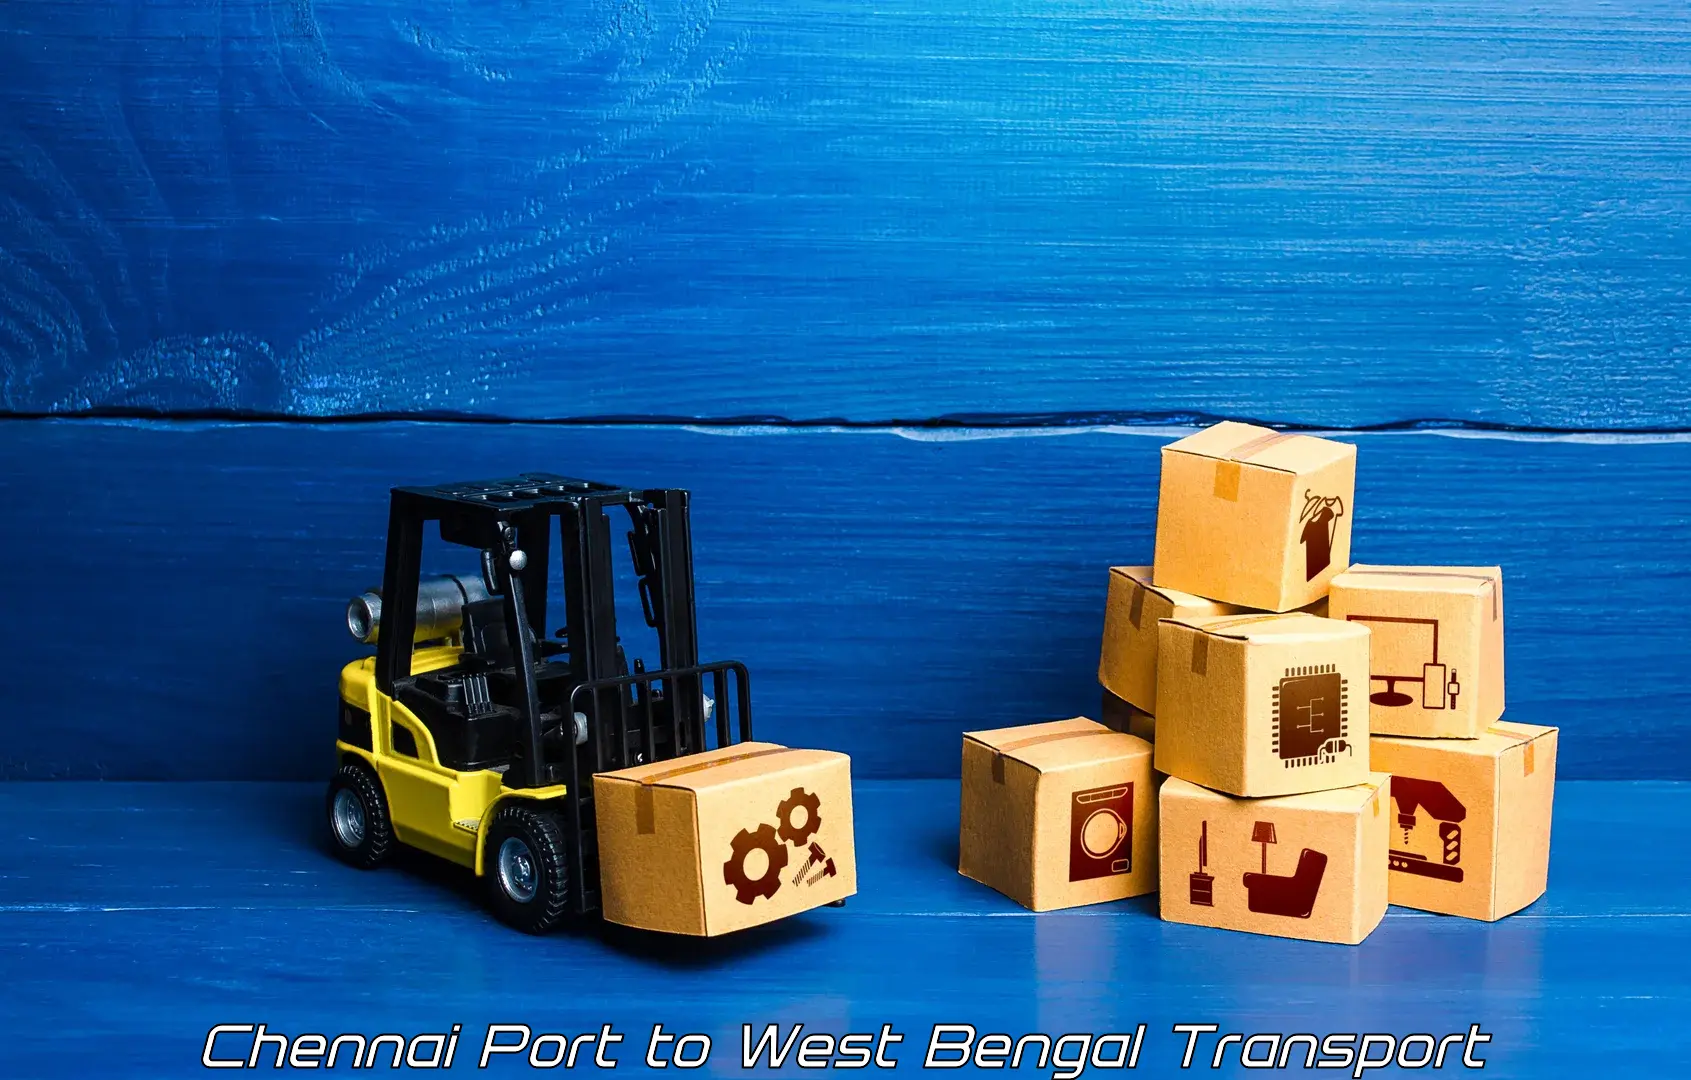 Truck transport companies in India in Chennai Port to Mejia